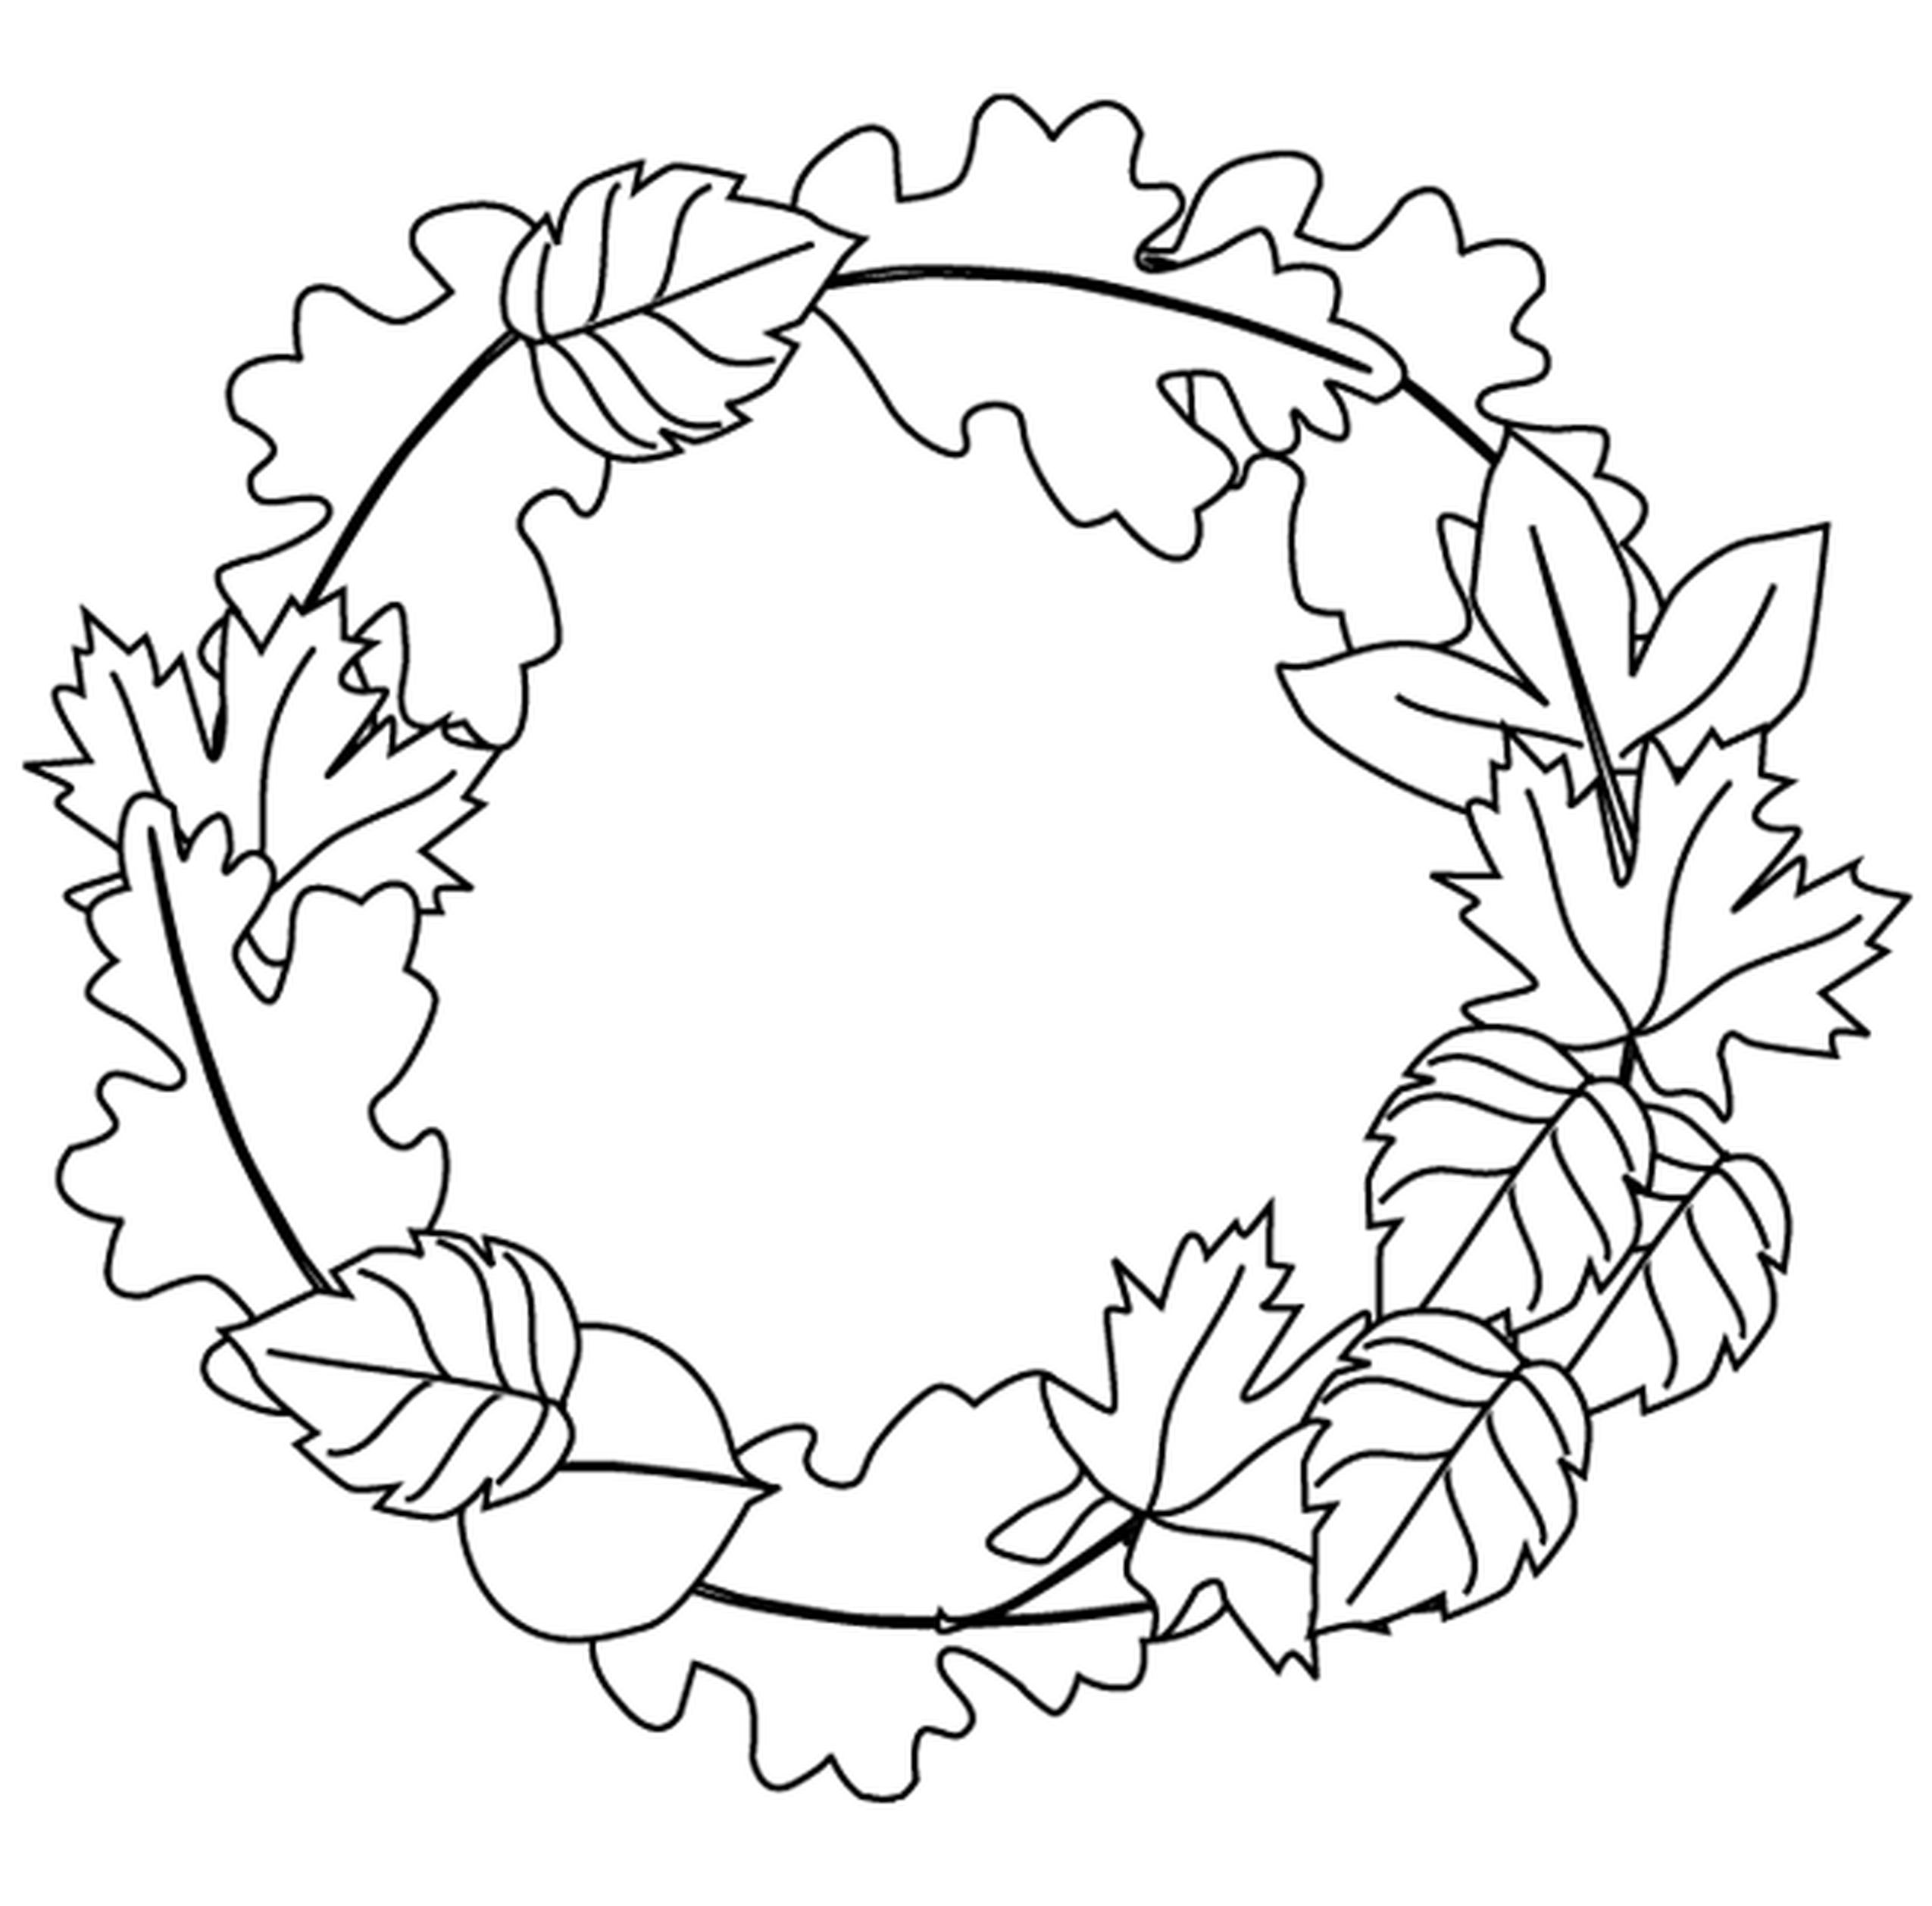 Fall Leaves Coloring Pages Best Coloring Pages For Kids